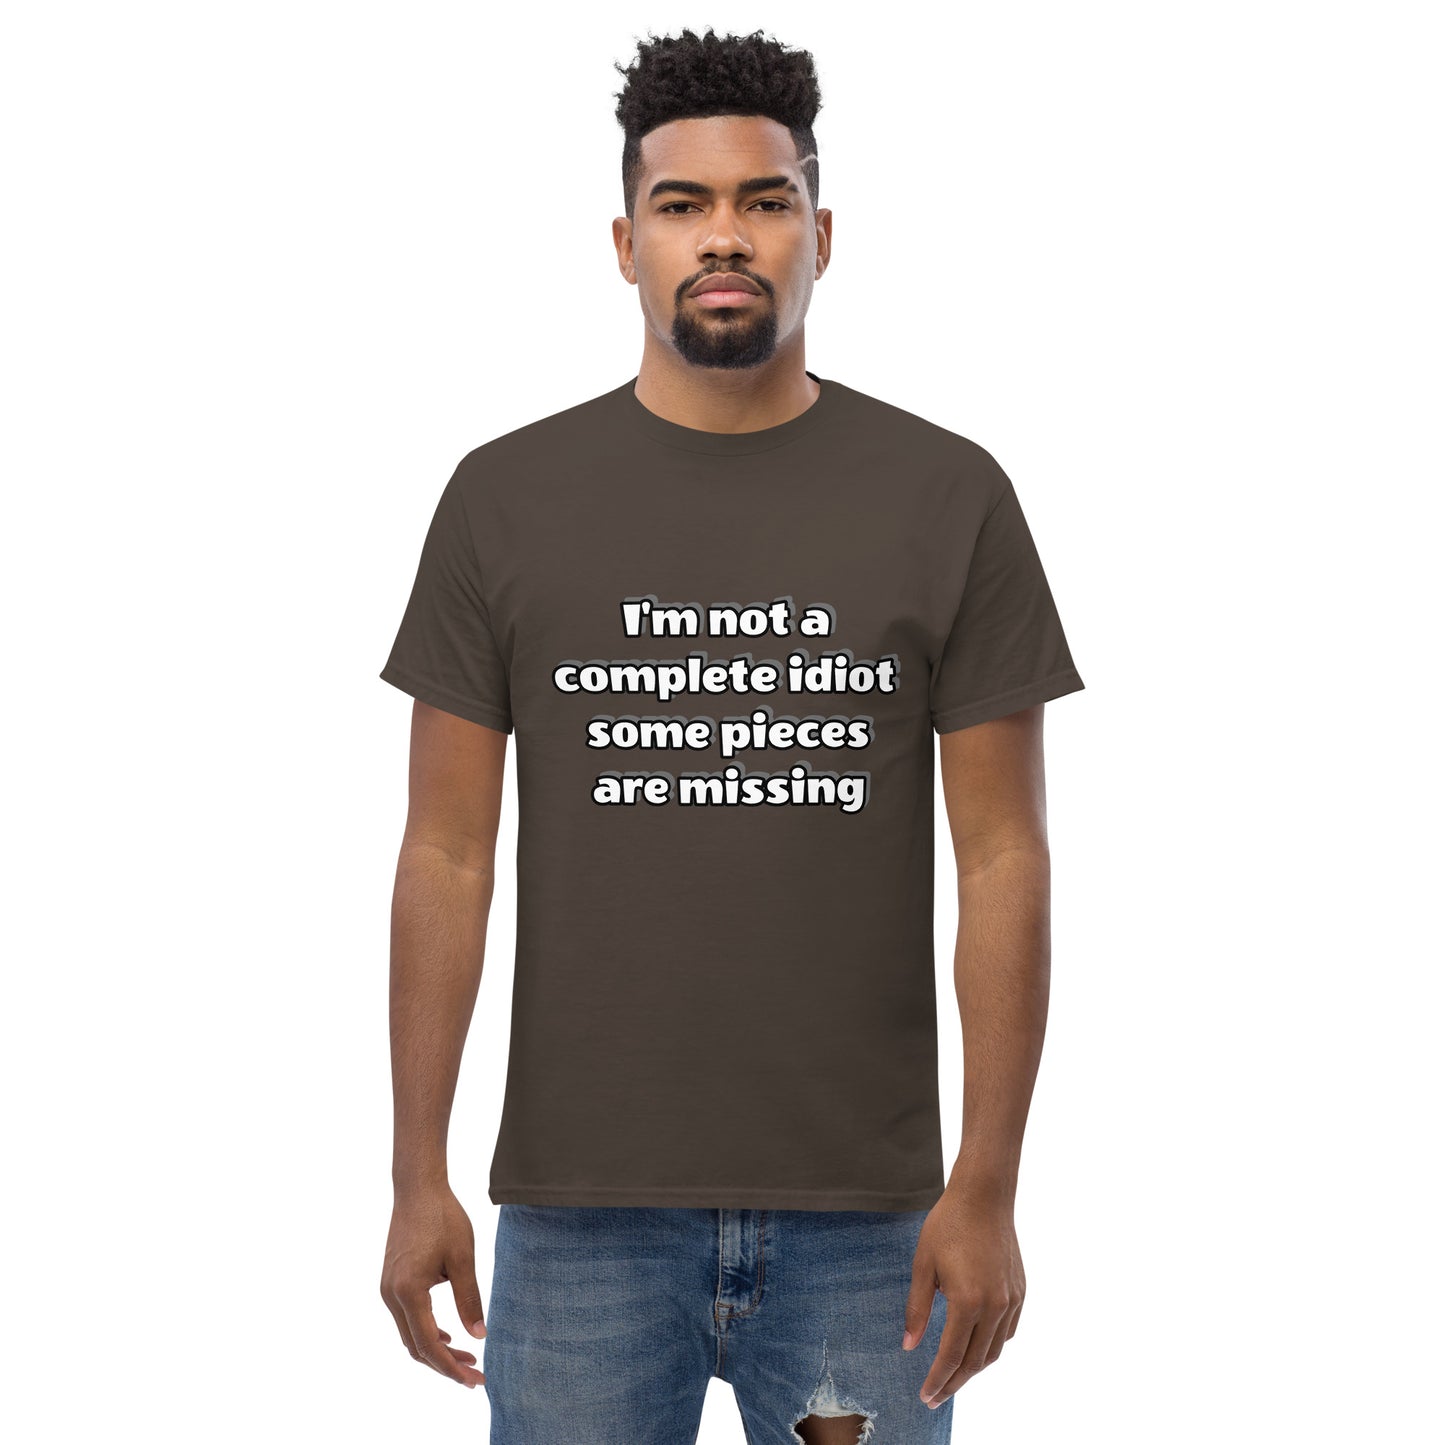 Men with dark chocolate t-shirt with text “I’m not a complete idiot, some pieces are missing”